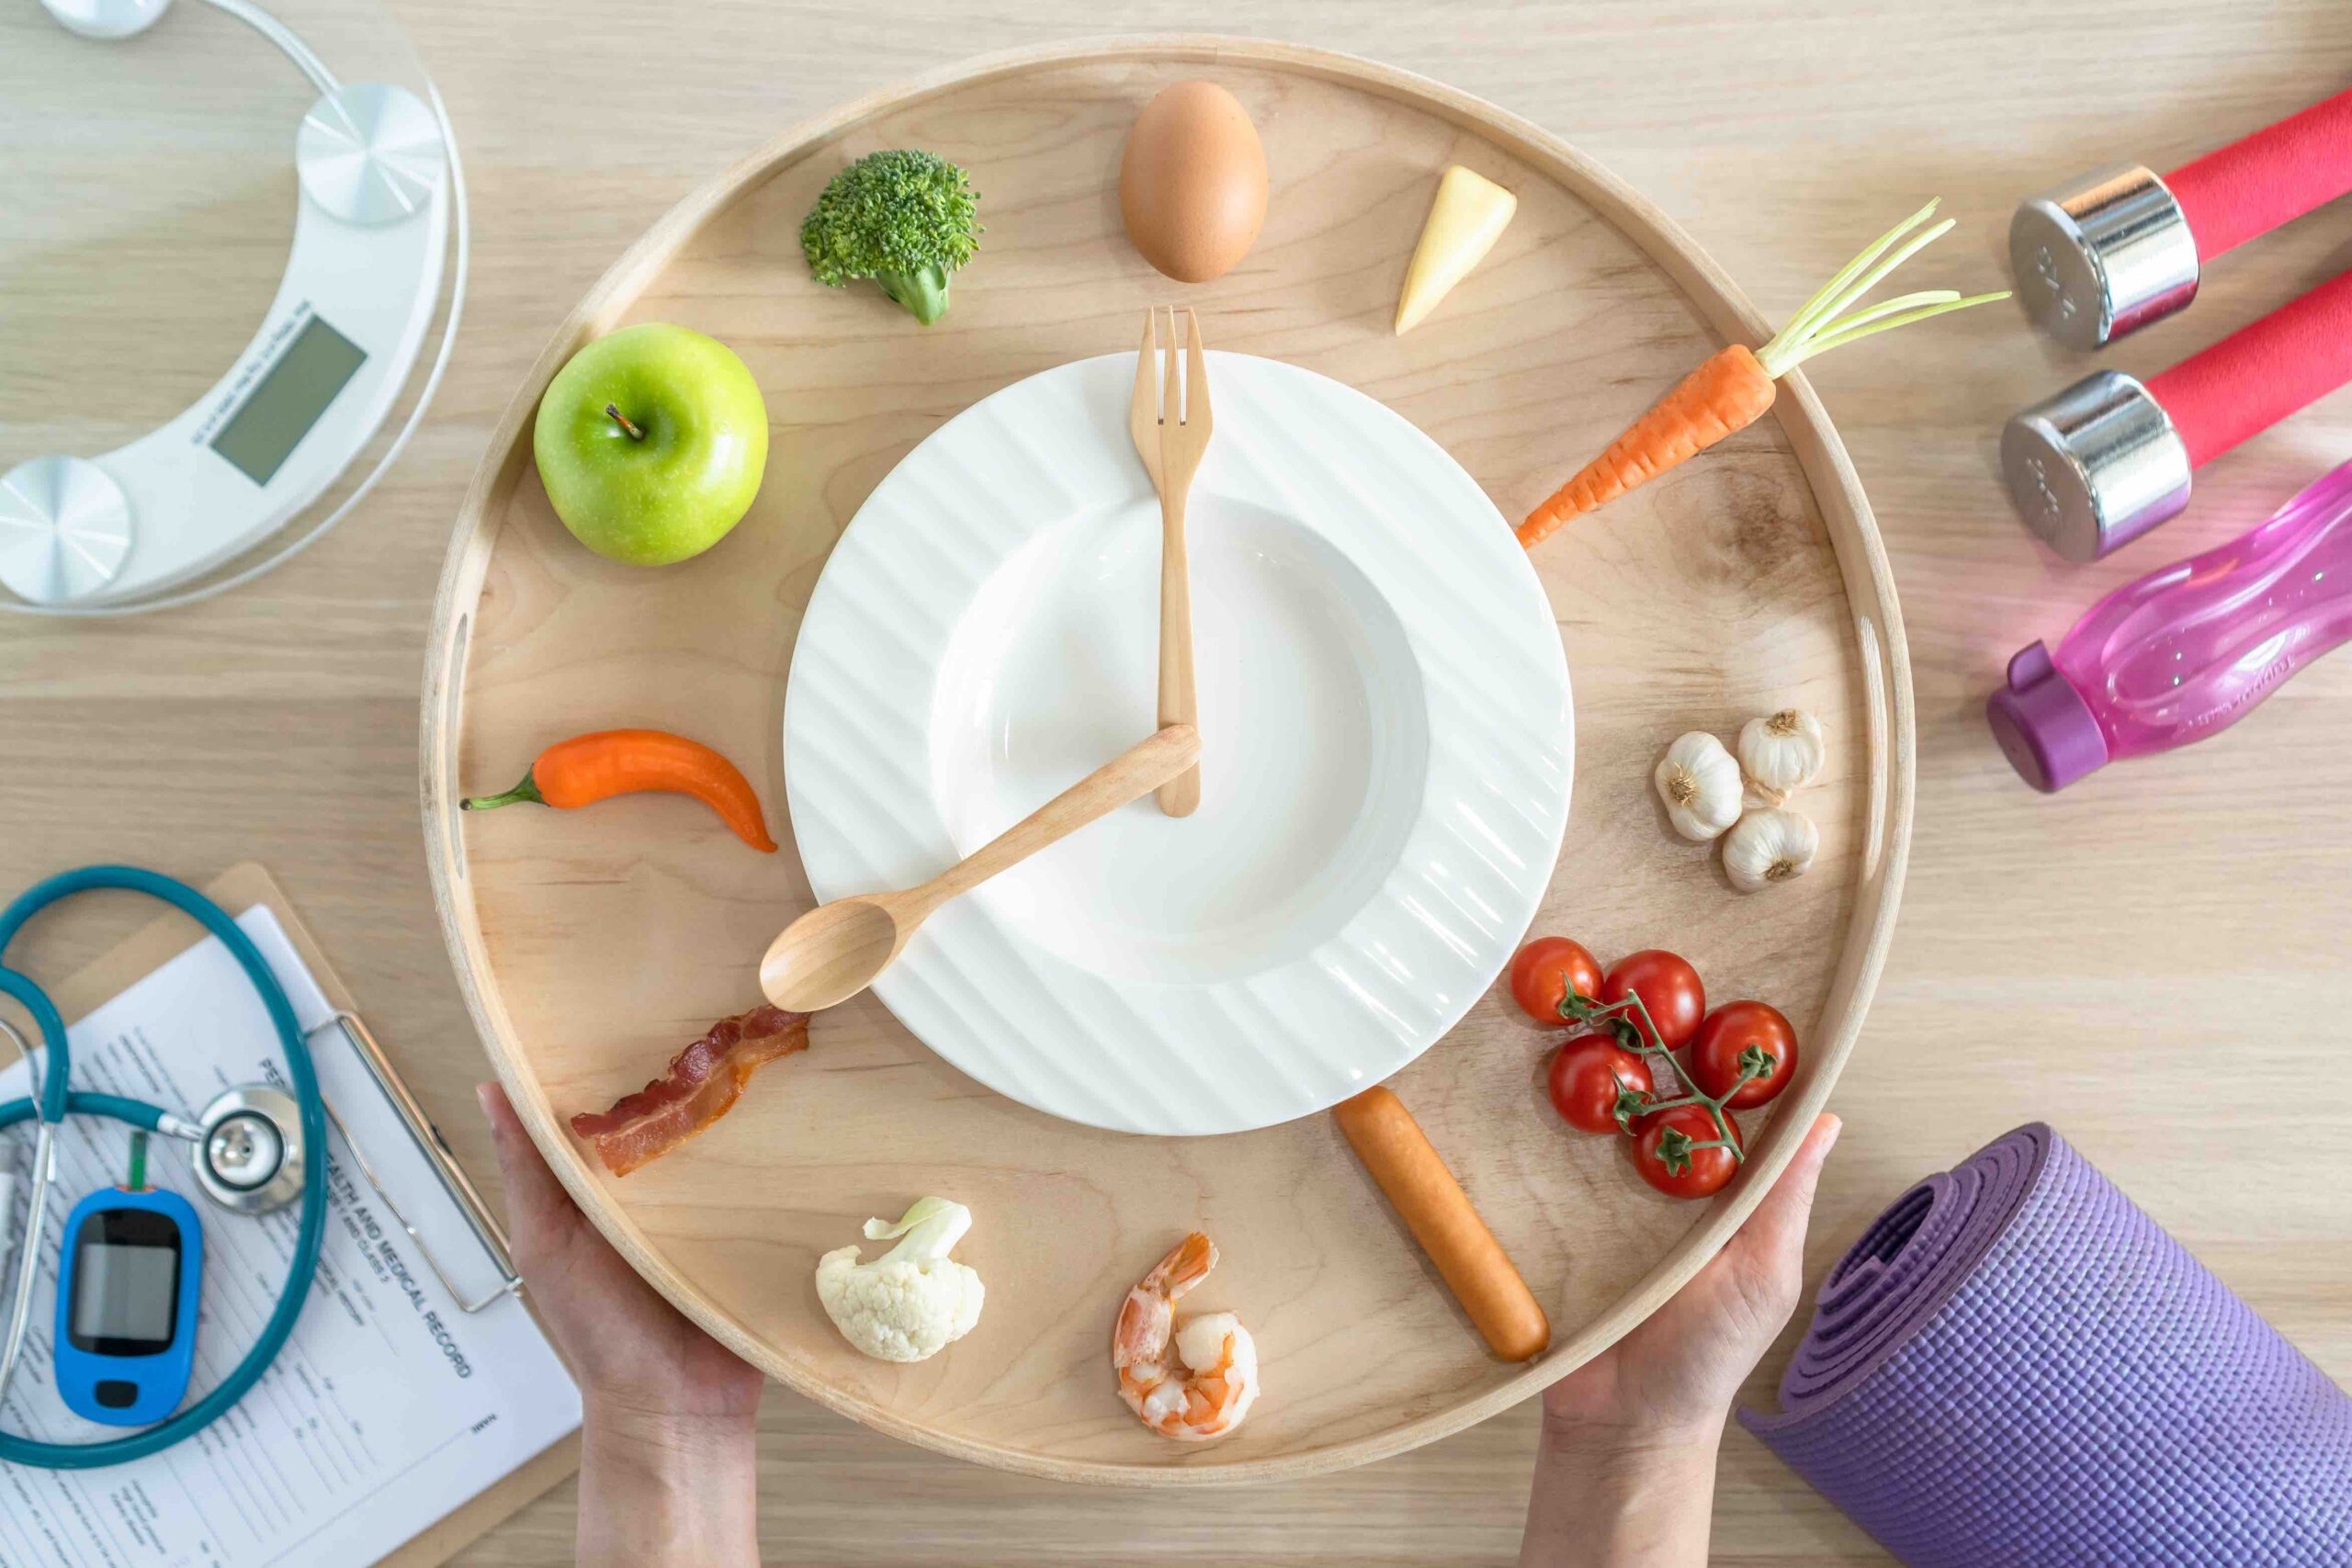 Intermittent fasting clock made with food and utensils.